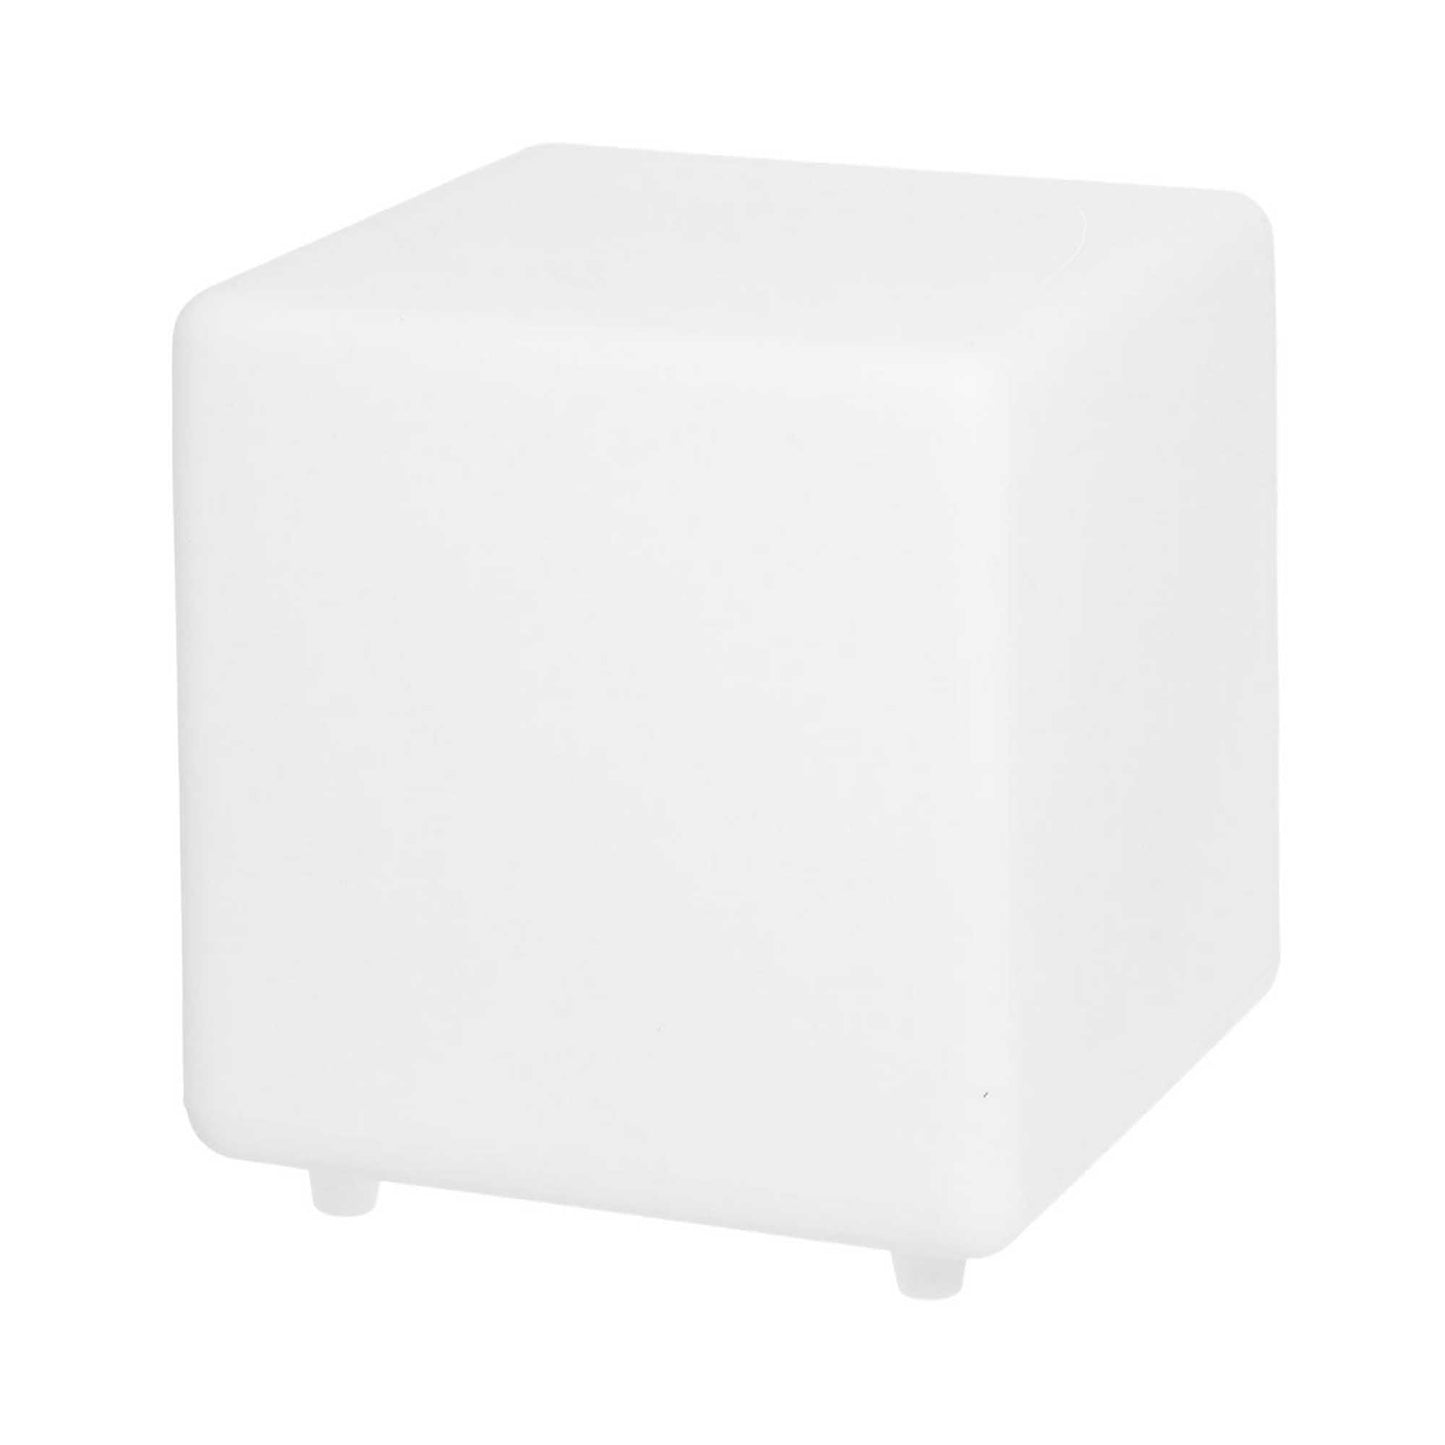 CARRY 30cm dimmable multicolored LED wireless light cube with remote control and induction base